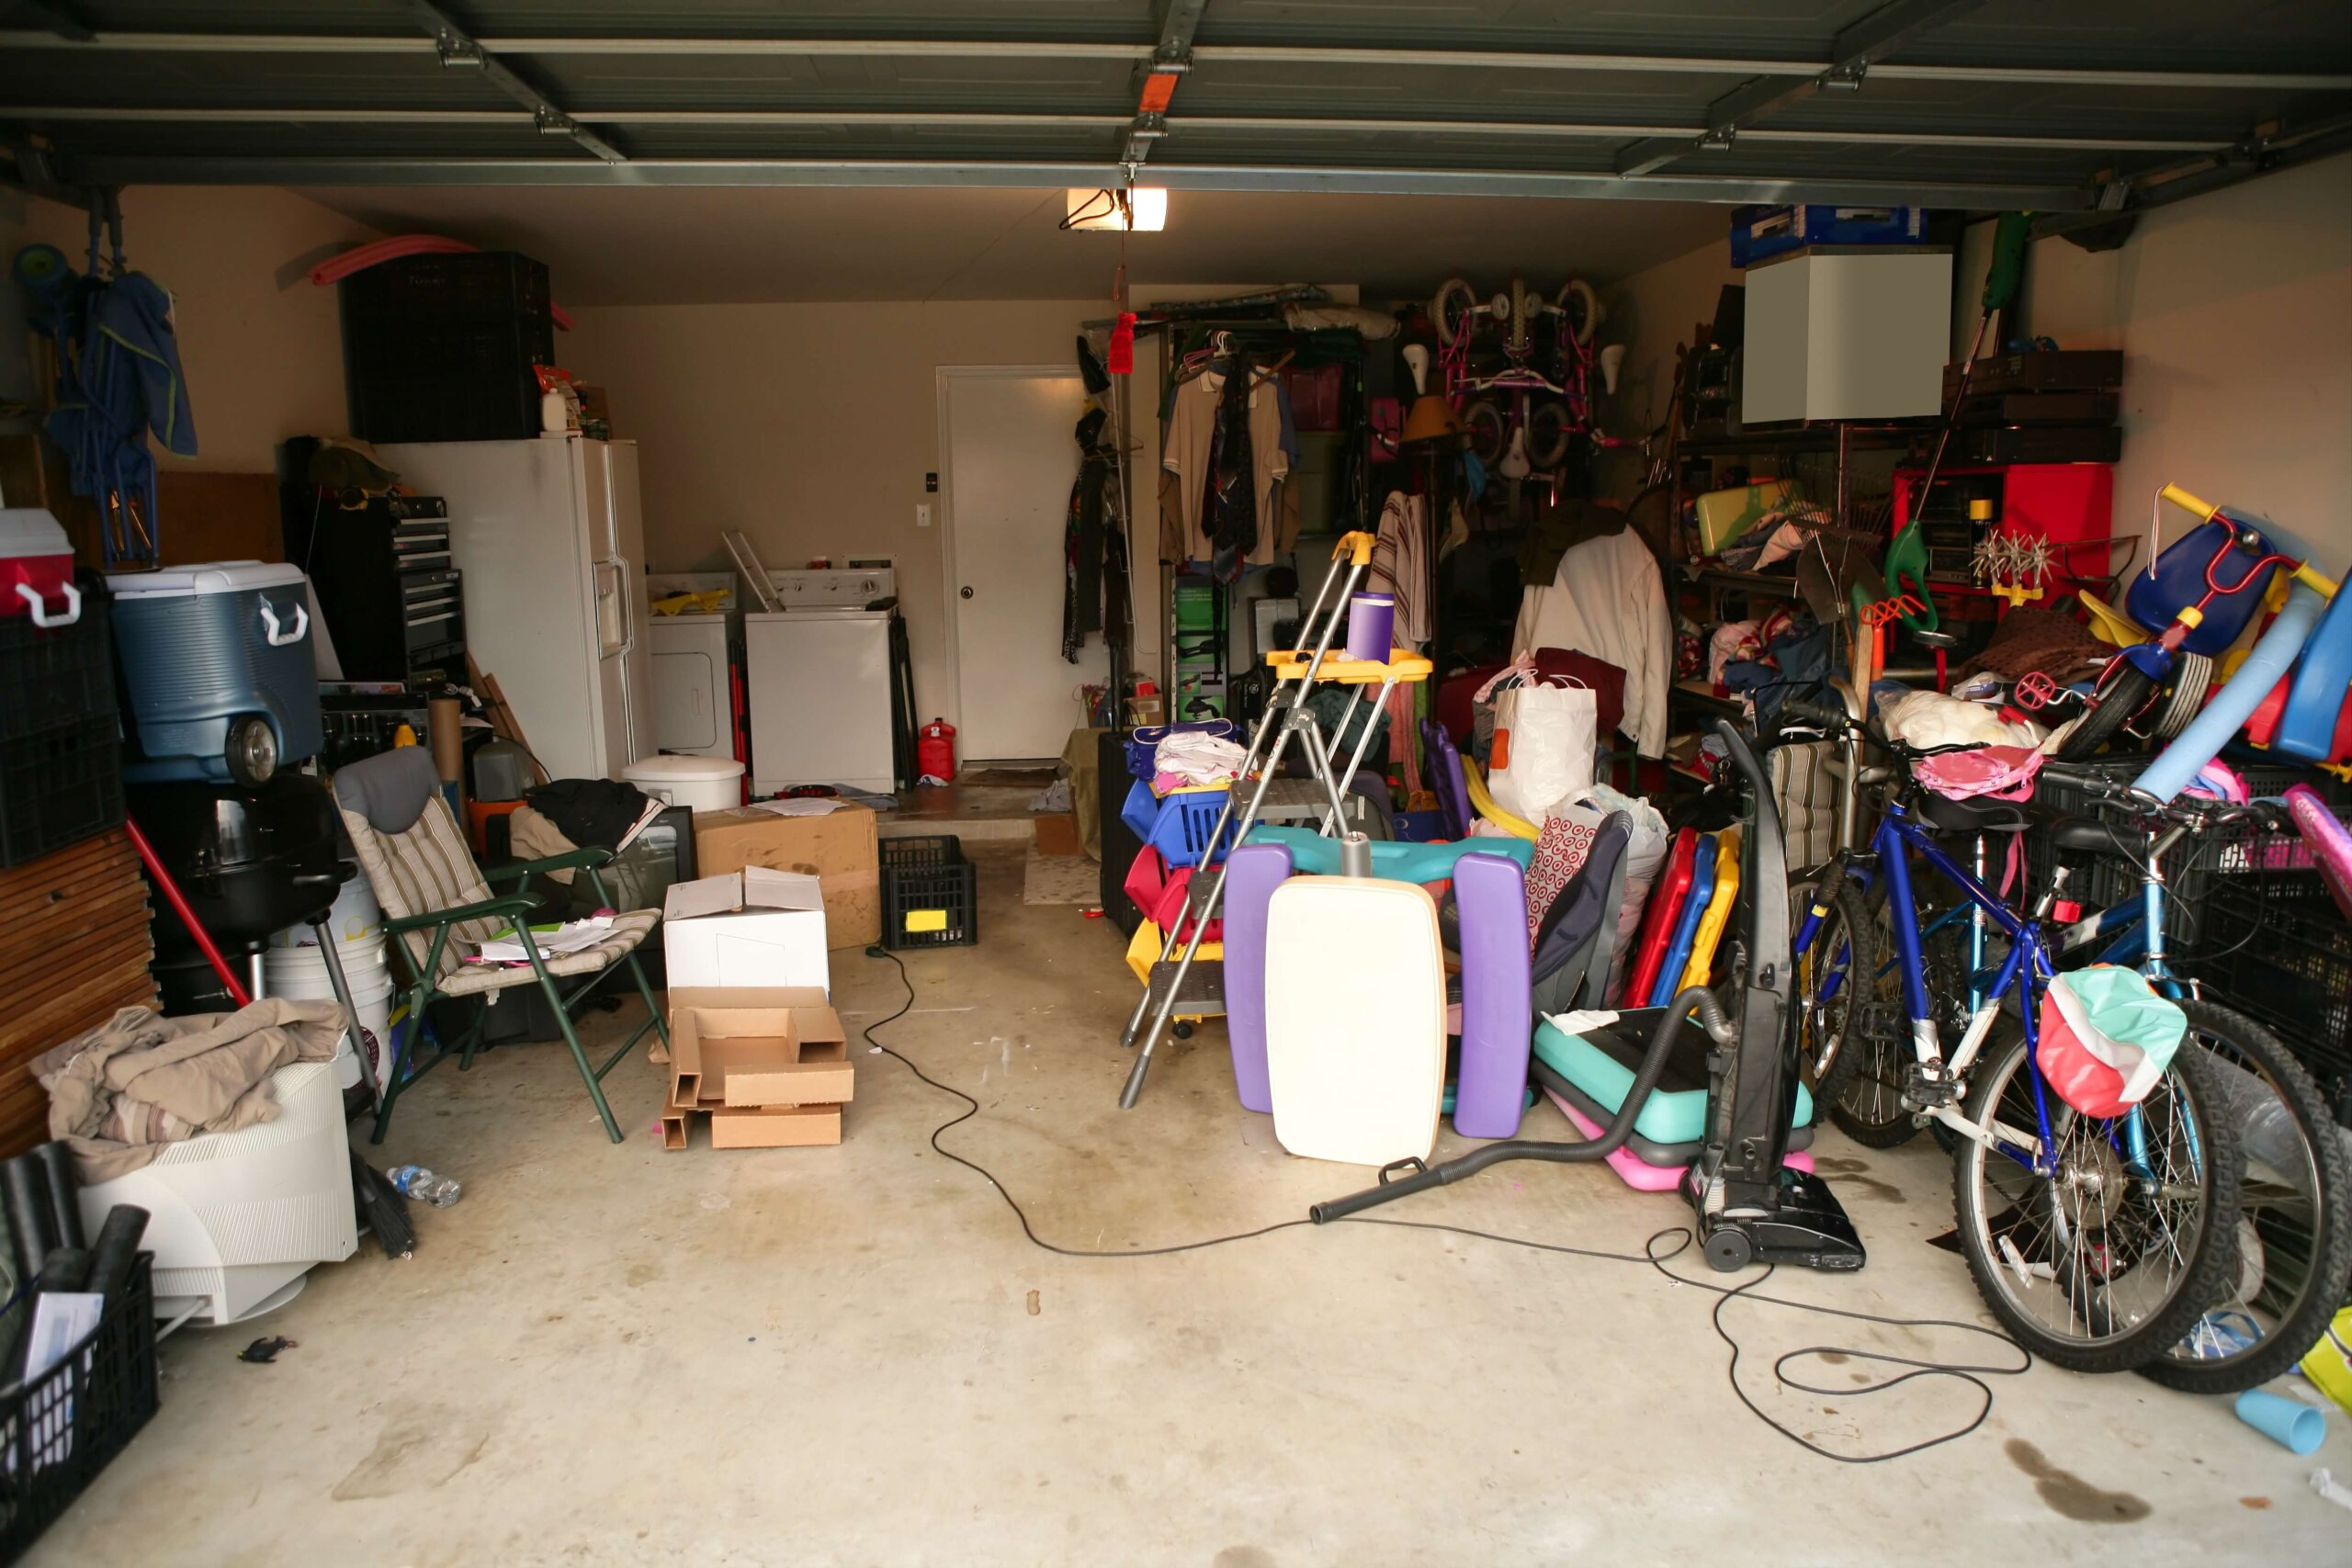 Garage with rodents